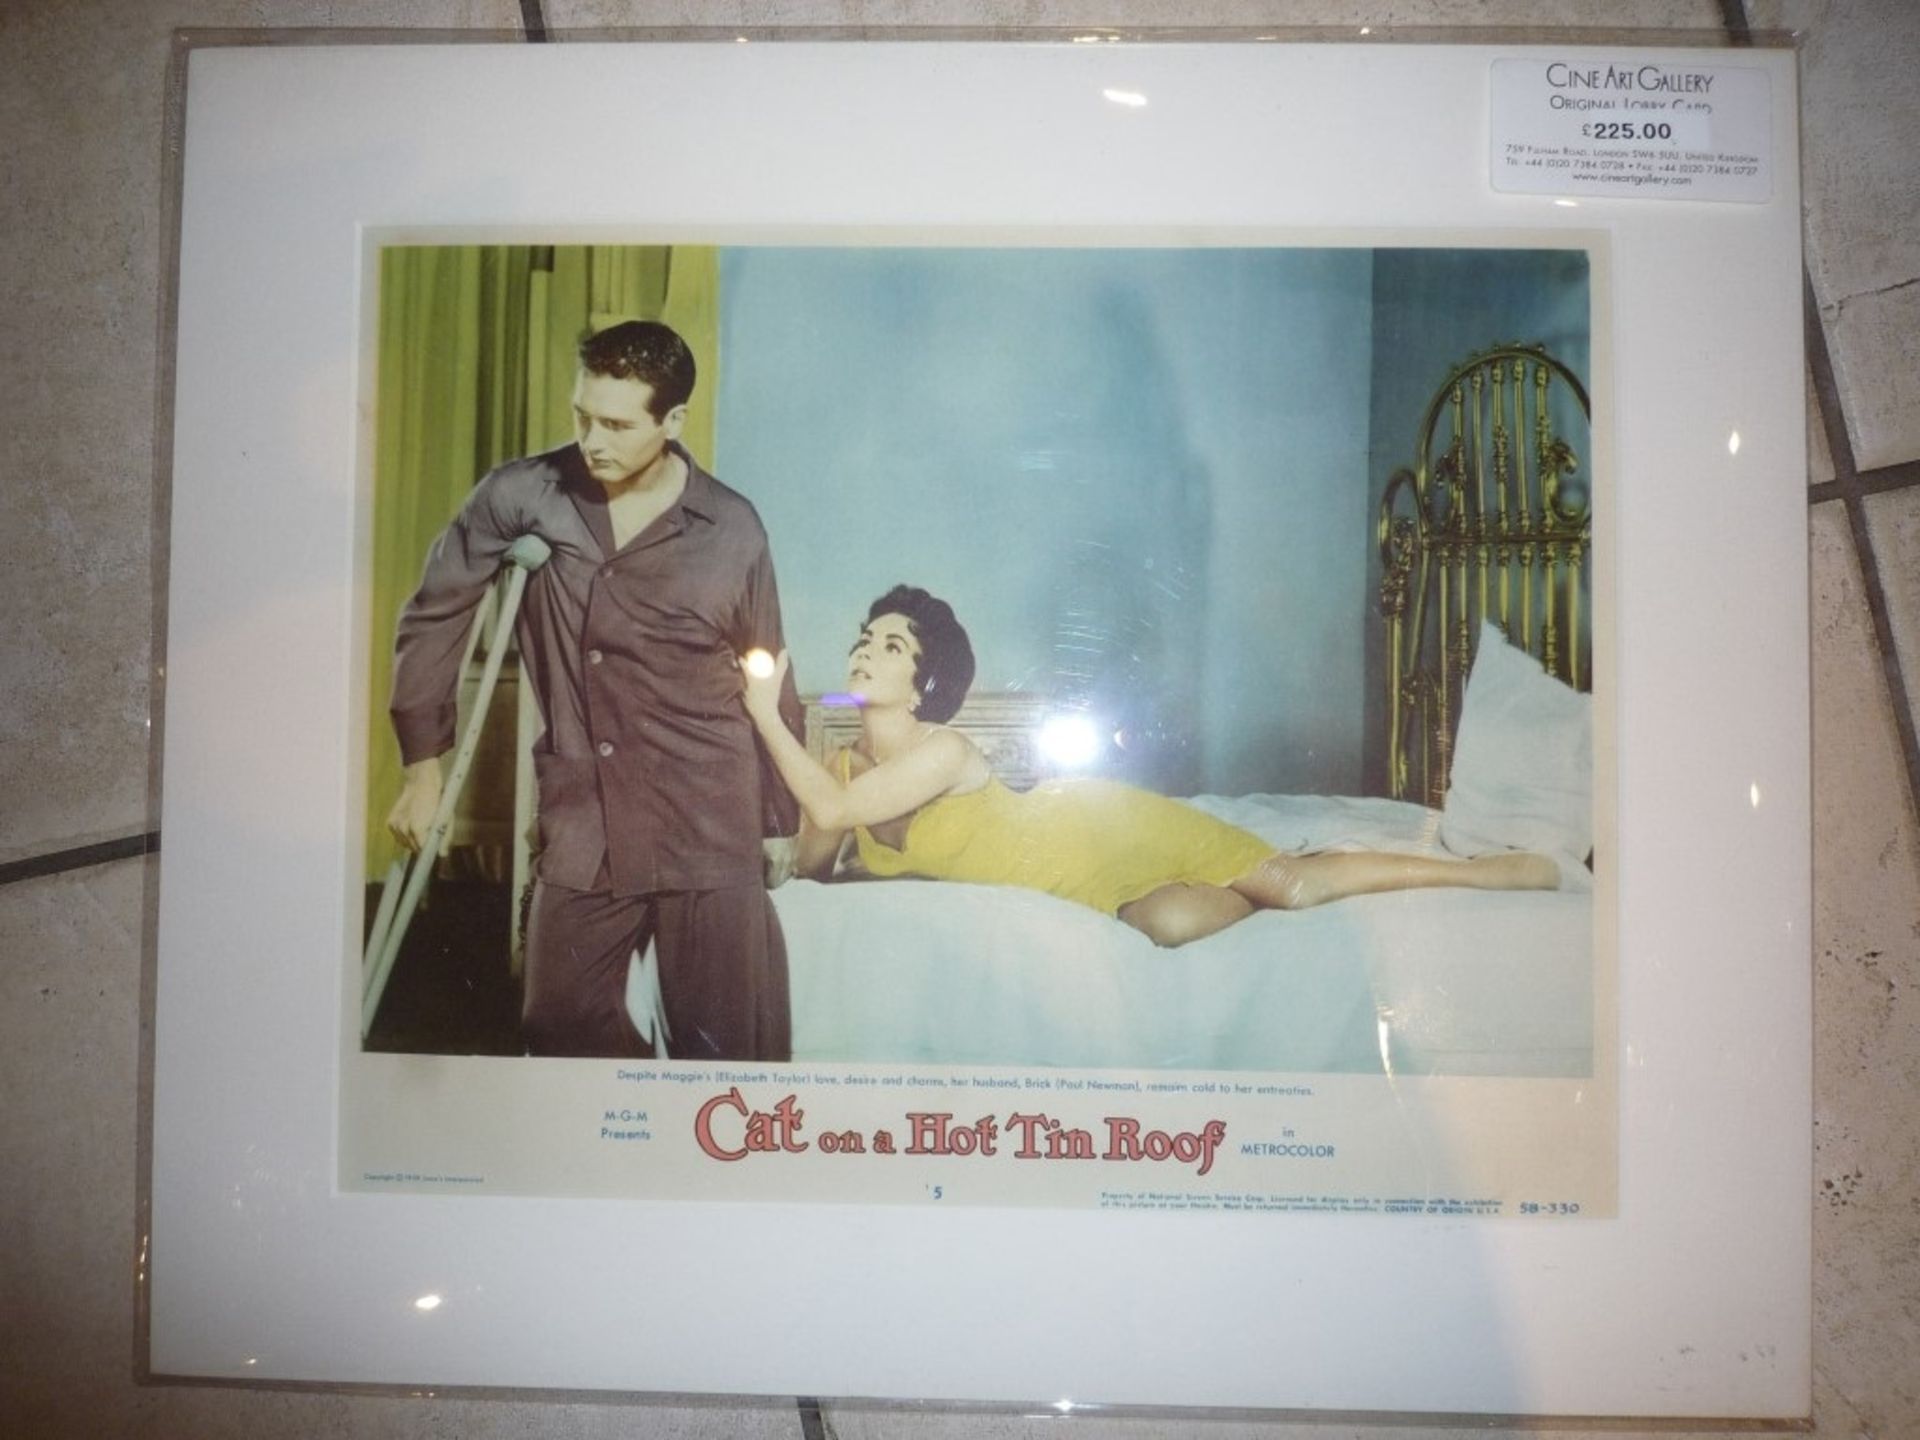 Cat on a Hot Tin Roof lobby card - Image 2 of 2